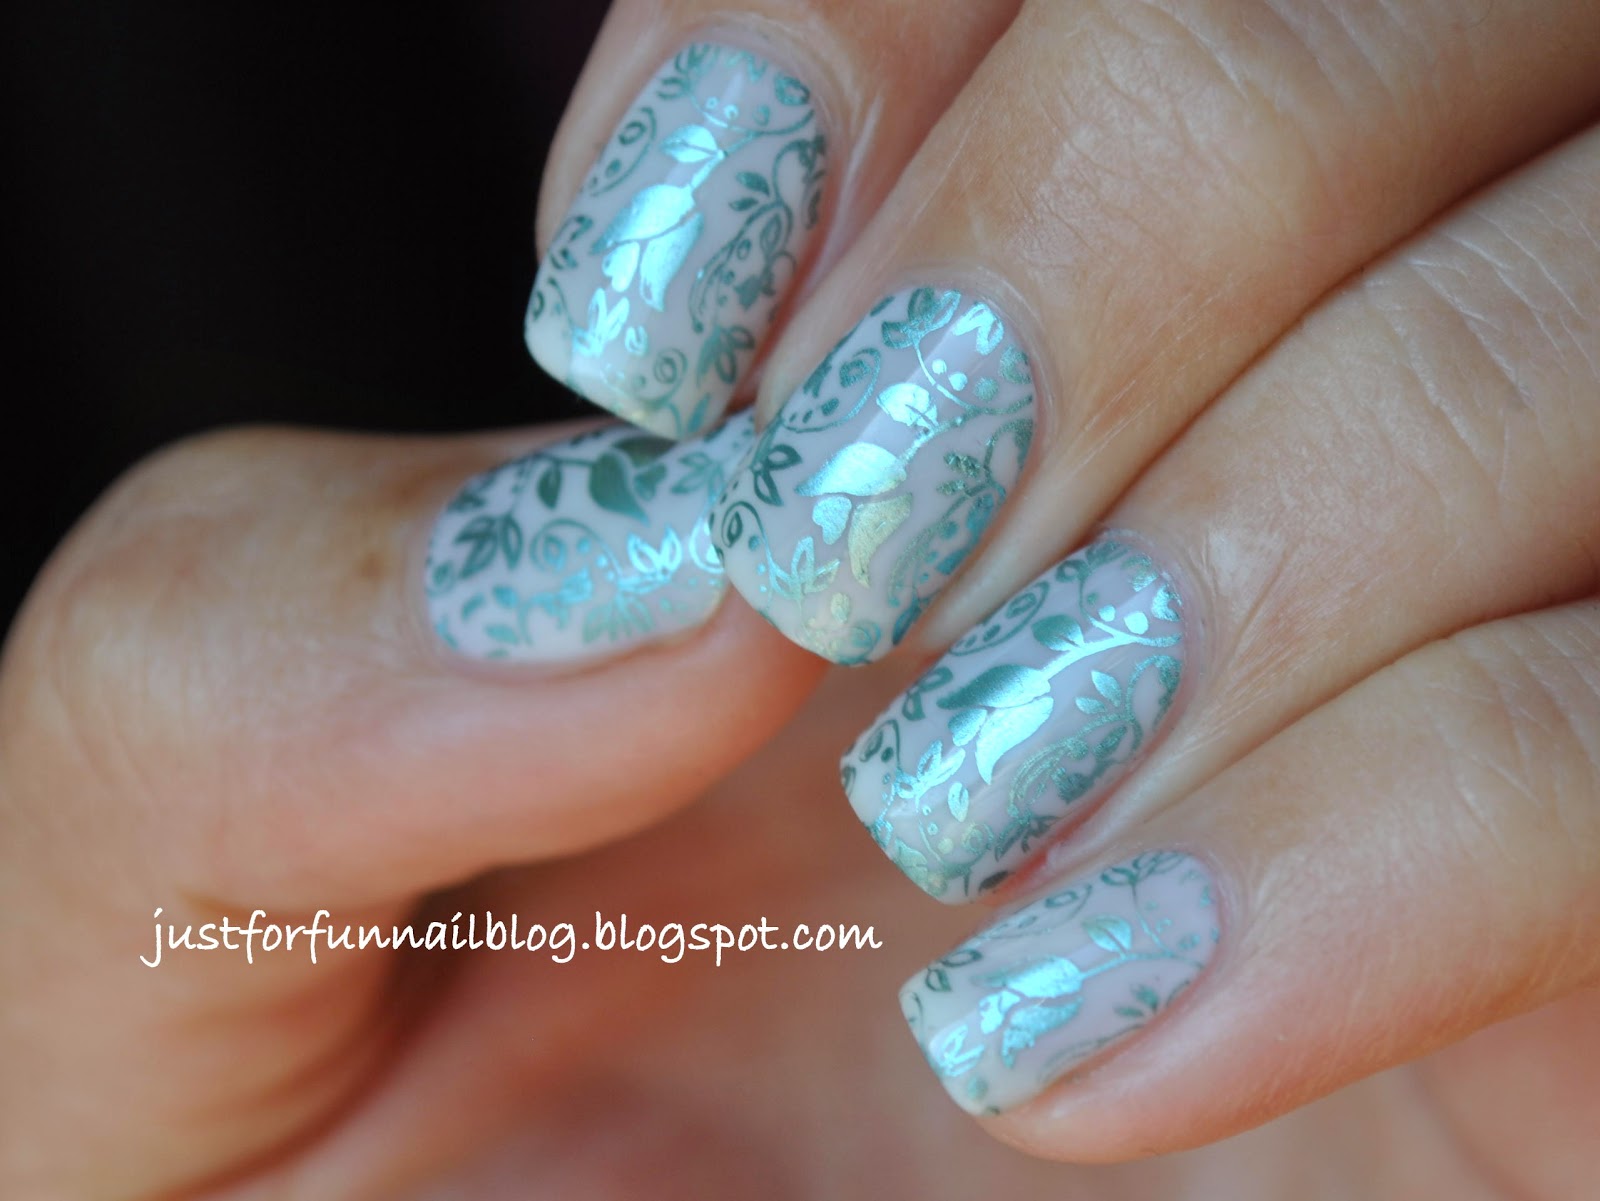 Turquoise flower stamping over white delicate base